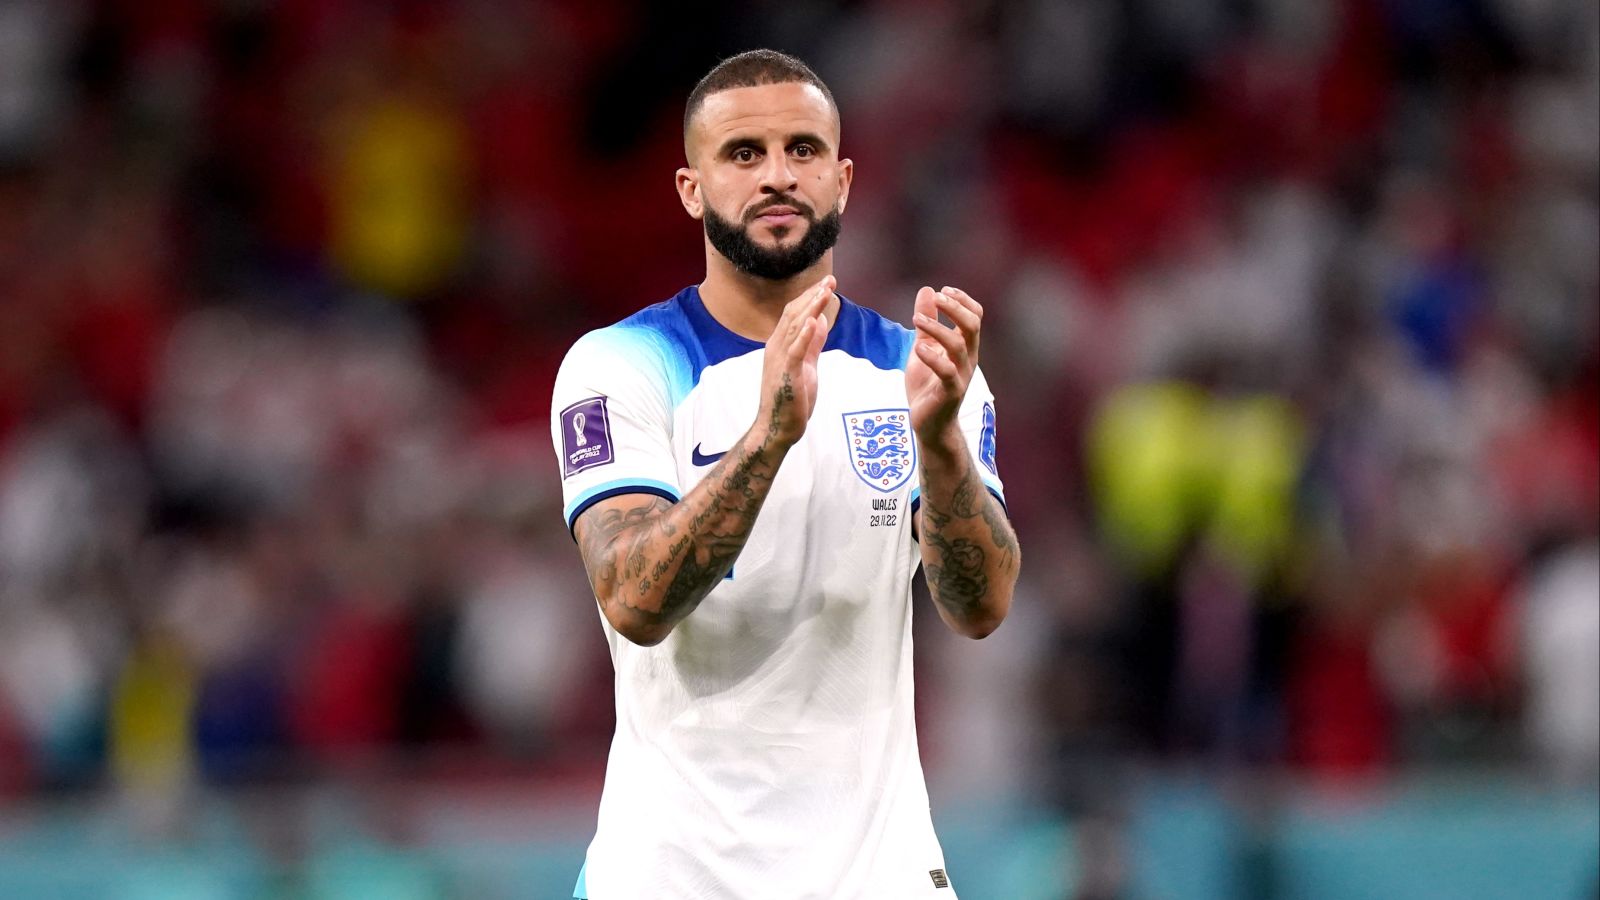 England ace Kyle Walker hopes to have Kylian Mbappe in his back